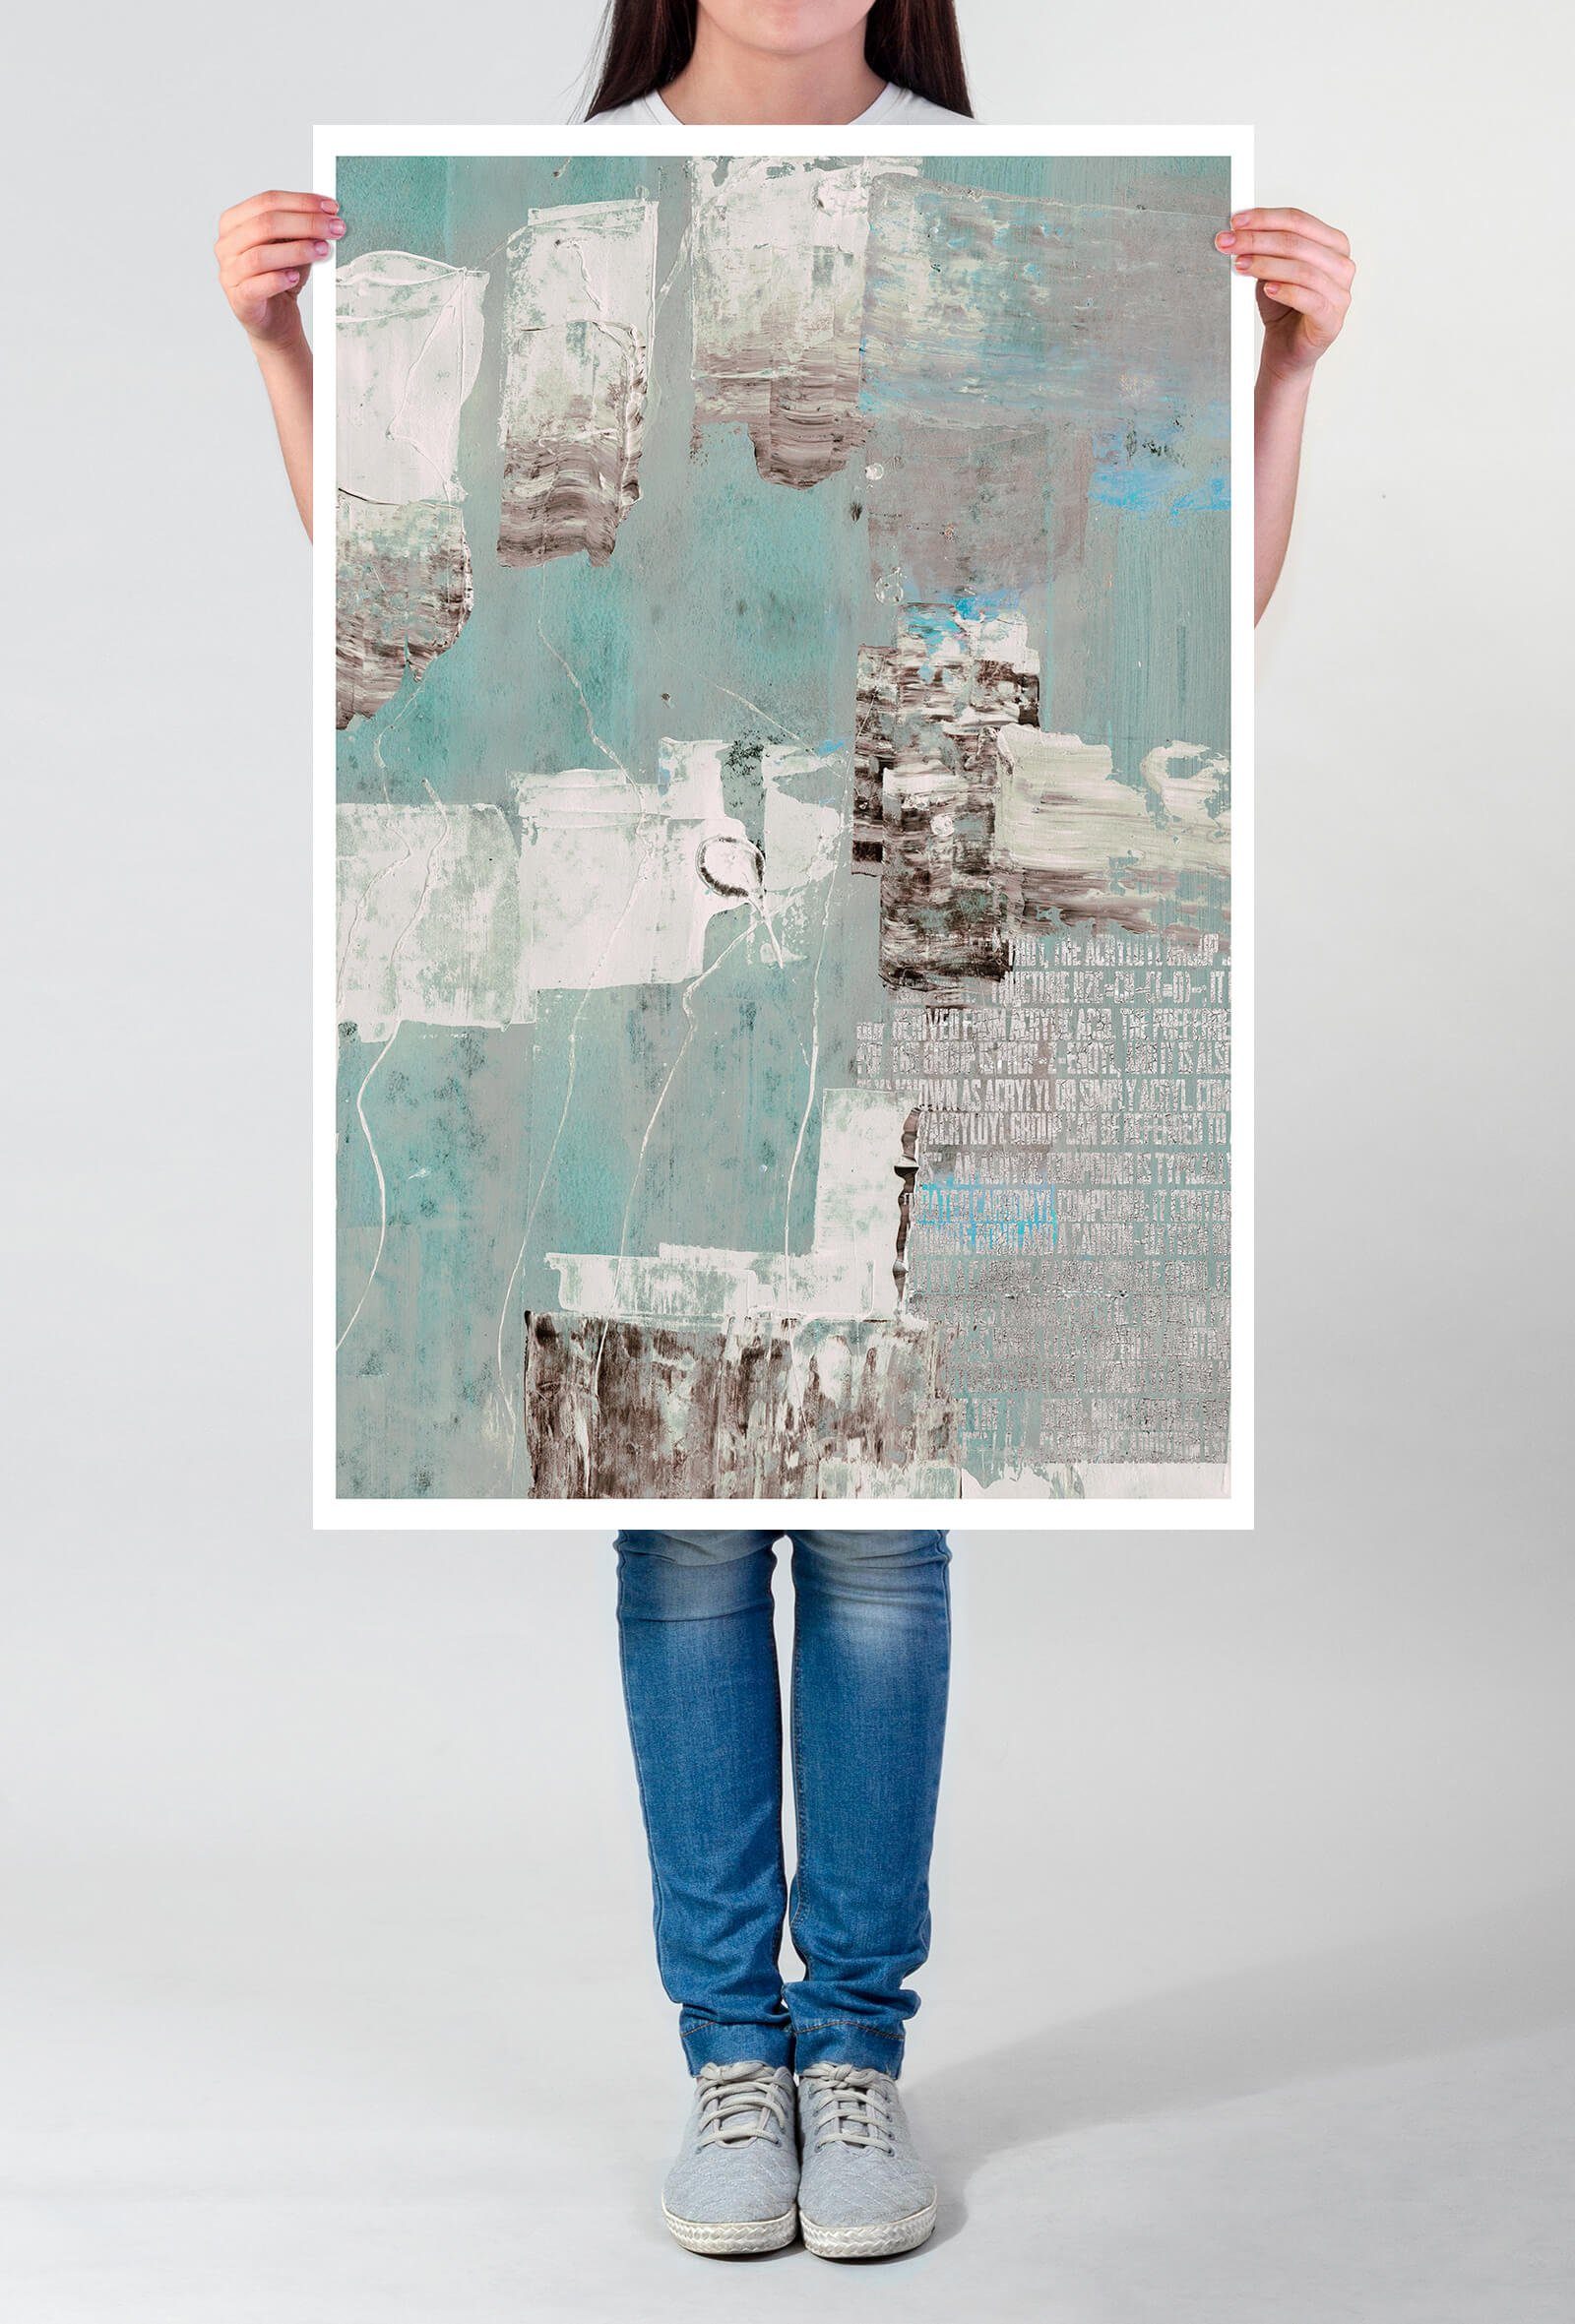 Sinus Art Poster My Name Is - Poster 60x90cm